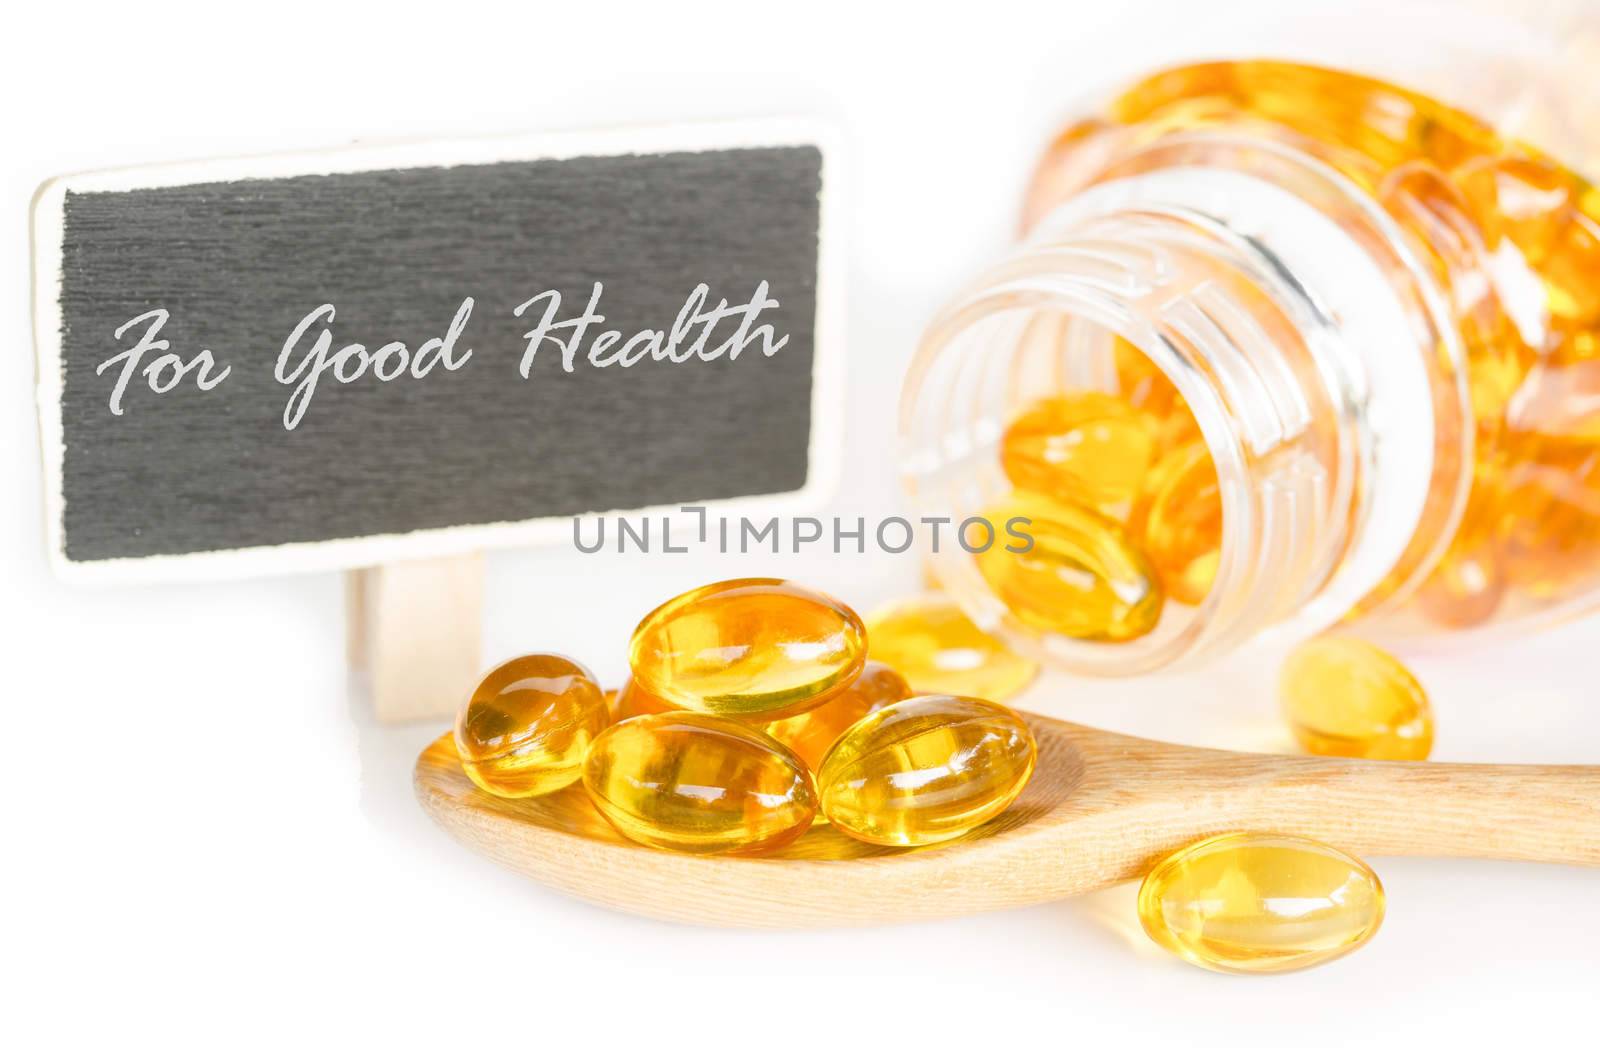 Cod liver oil omega 3 gel capsules and For good health tag on white background.